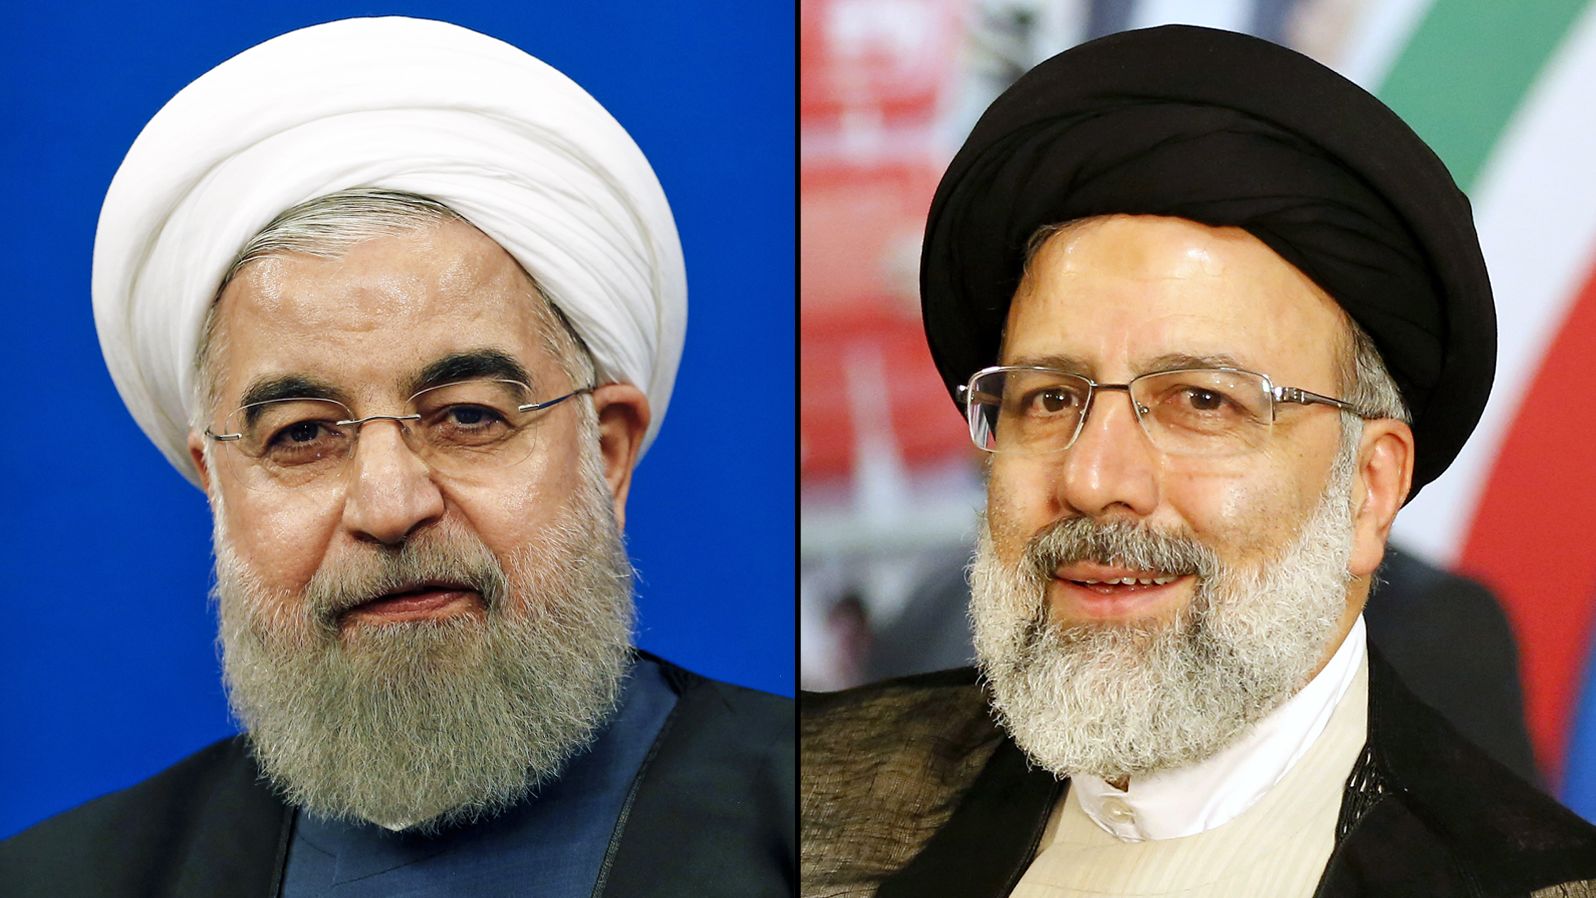 Rouhani (L) and his chief election rival Ebrahim Raisi.